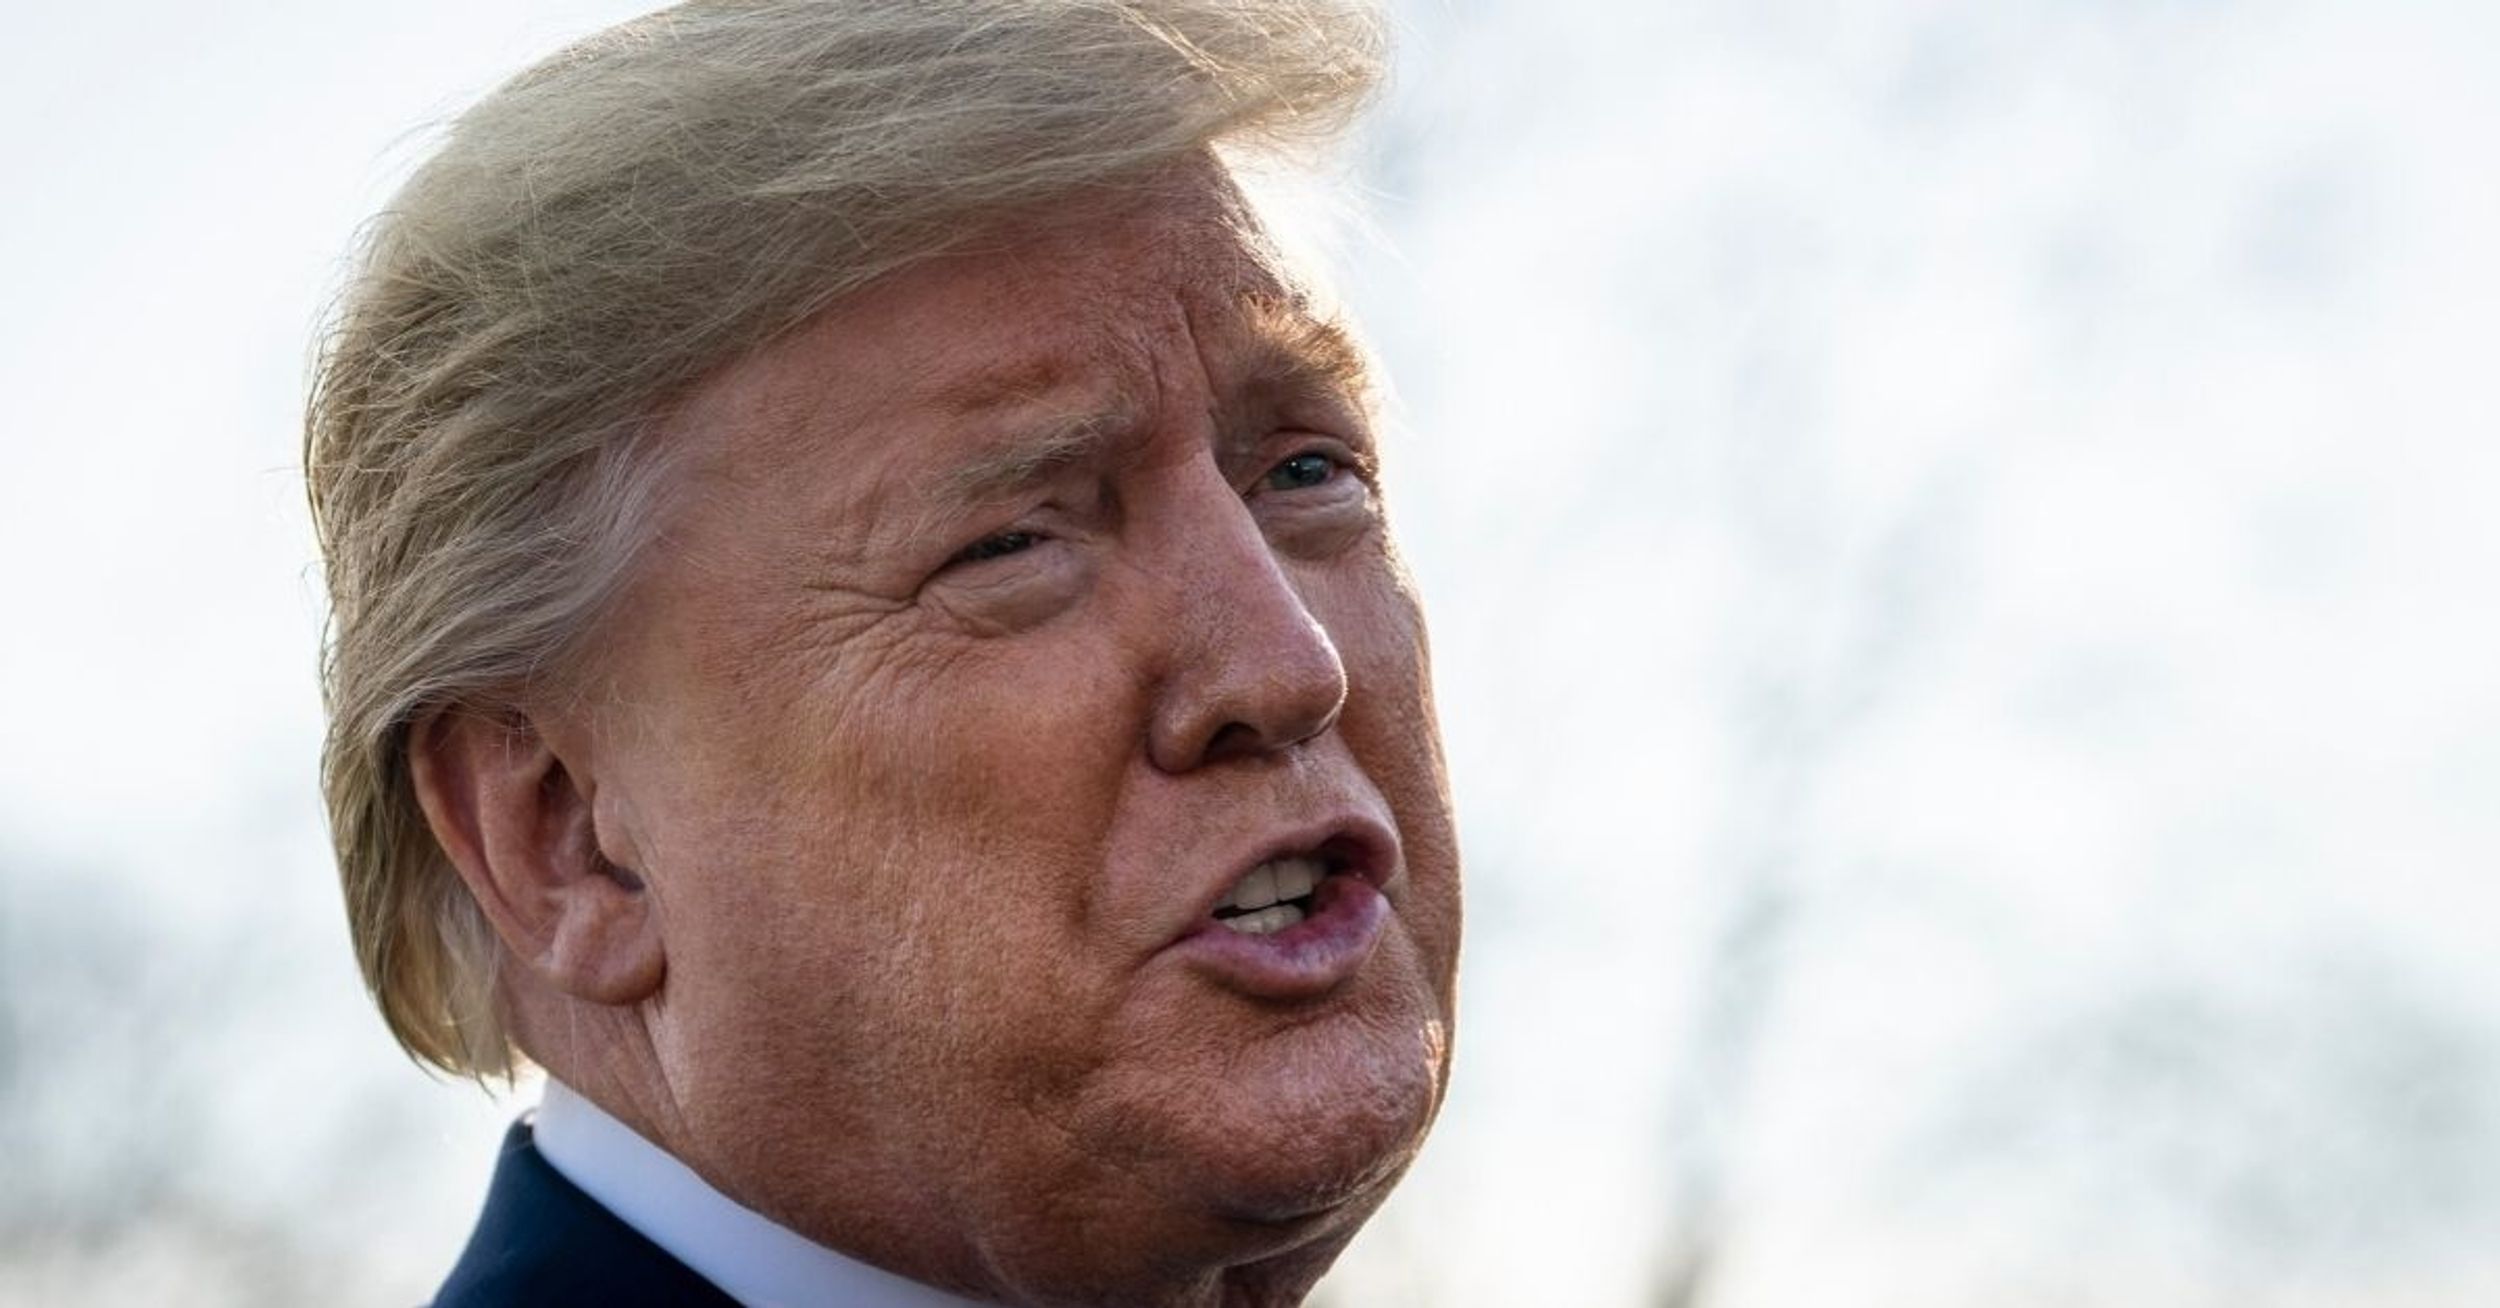 Trump Just Tried To Claim That He Hasn't Touched His Face In Weeks Amid Coronavirus Concerns—And Twitter Was Like 'Hold My Beer'